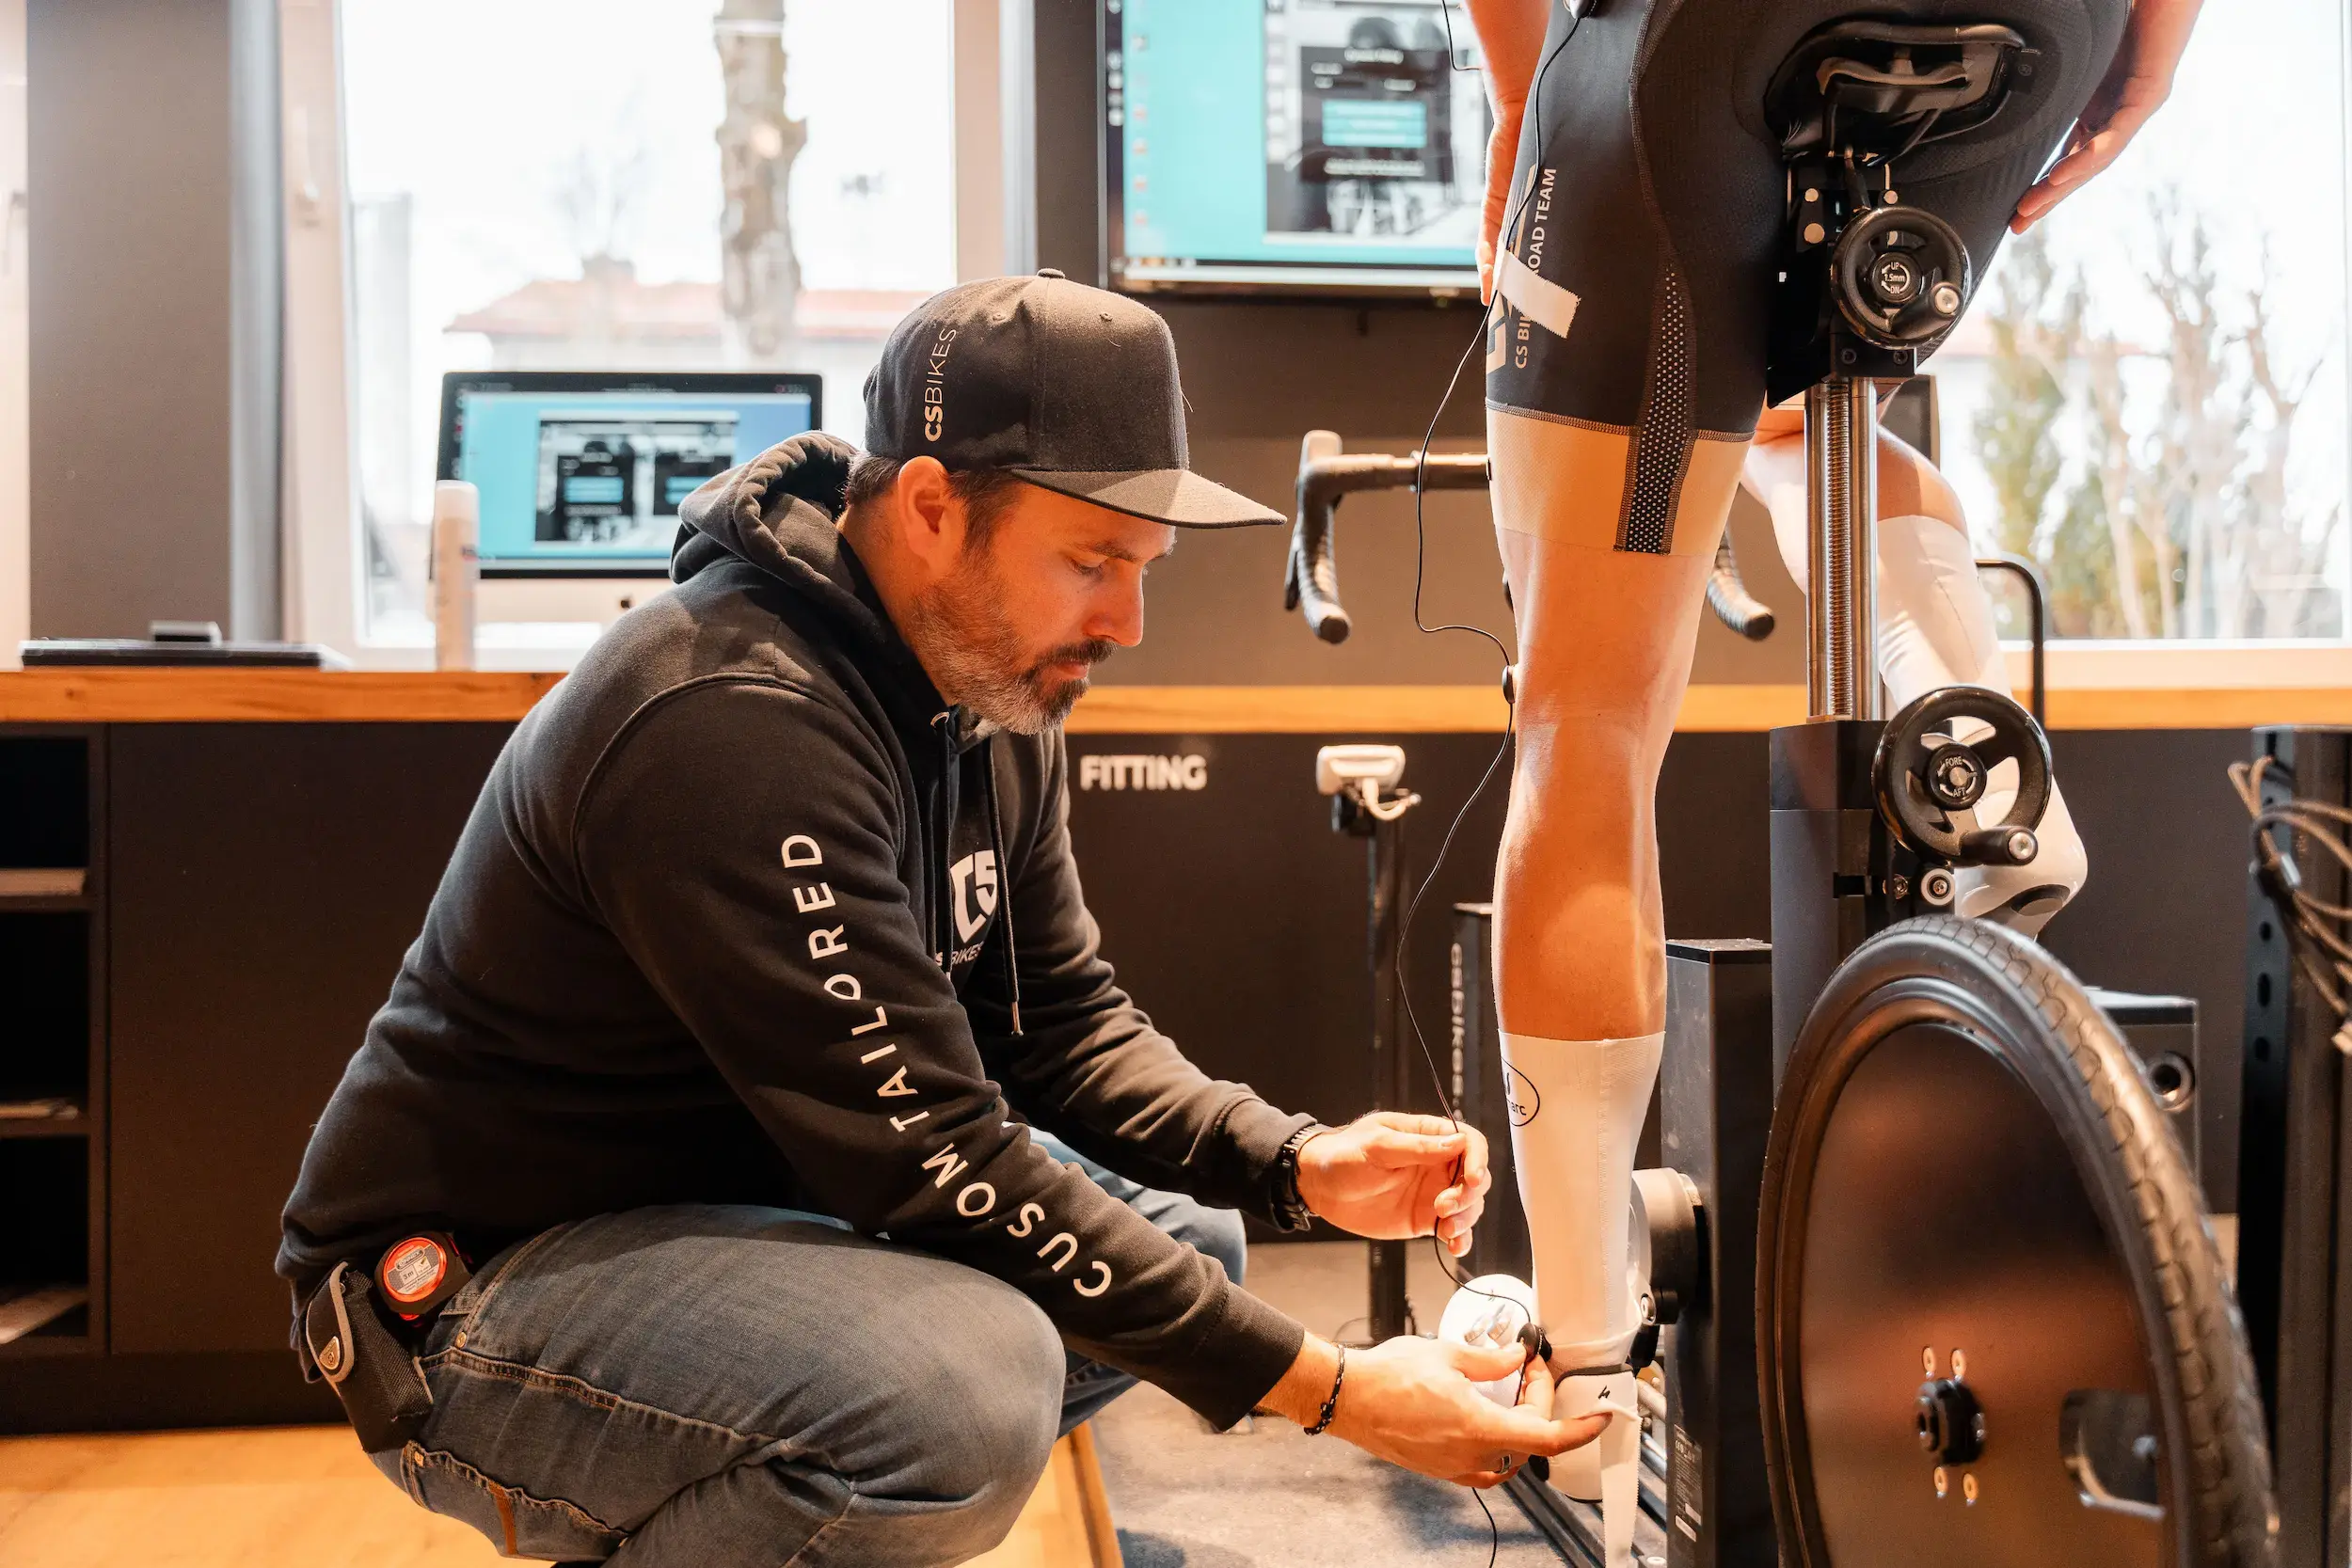 Our Bike Fitting is not a luxury but an investment in your riding experience and health. With our high-quality service in Moosach, we take your cycling experience to the next level. Book an appointment at CS Bikes today and experience the benefits of a tailored Bike Fitting near Munich!